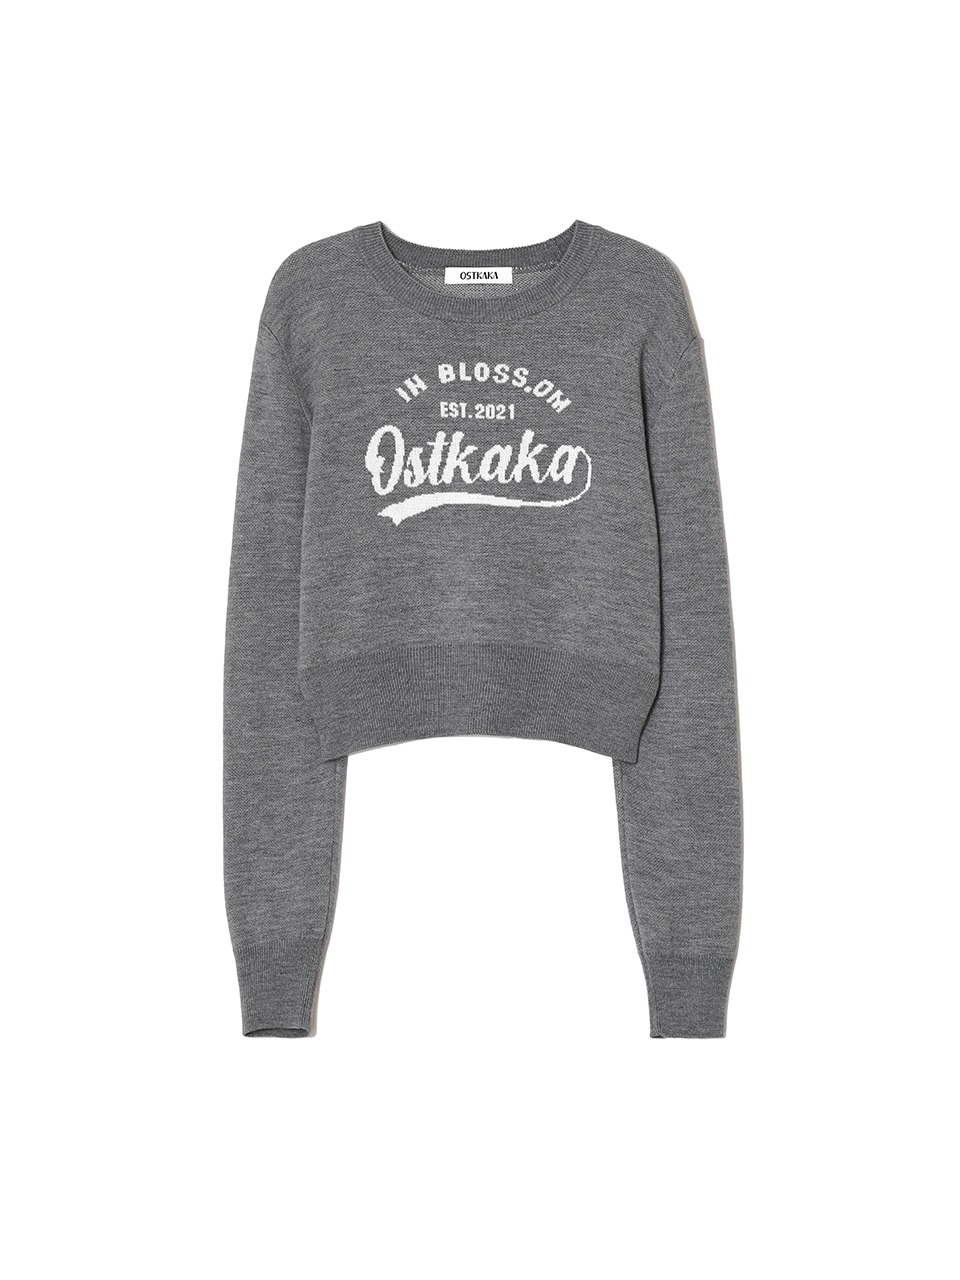 Wool Blossom Lettering Knit Grey